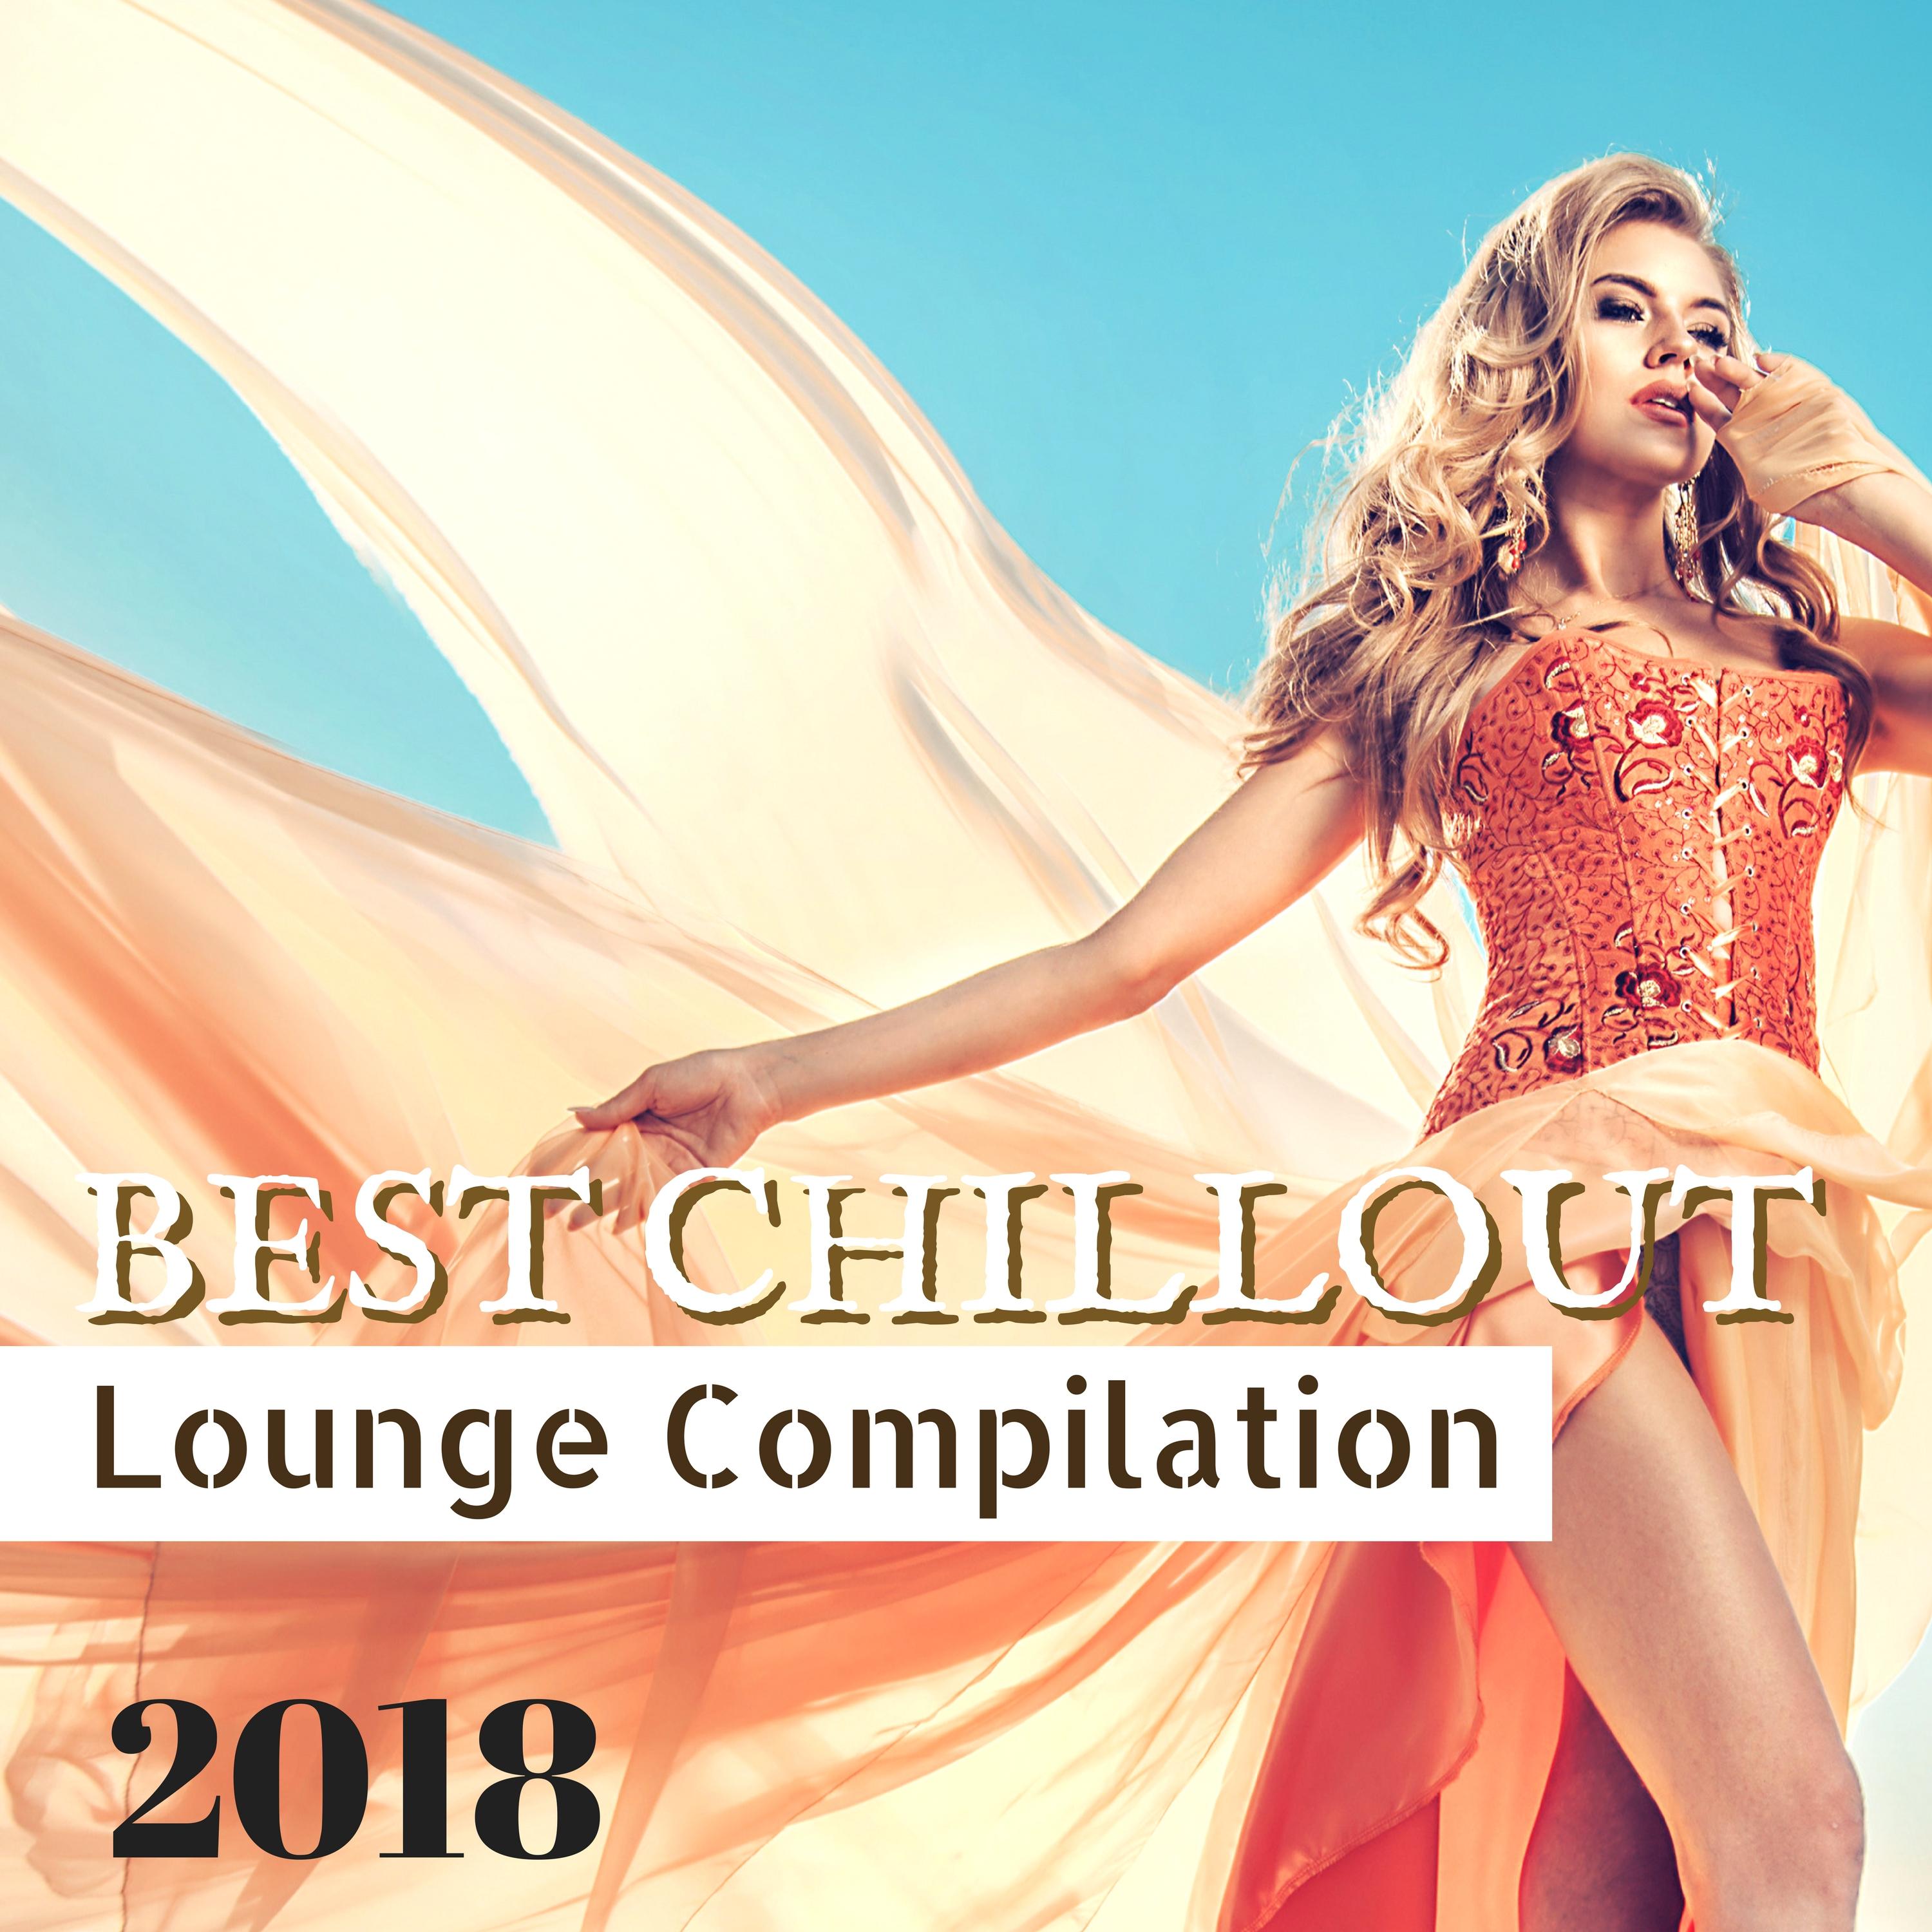 Best of Lounge